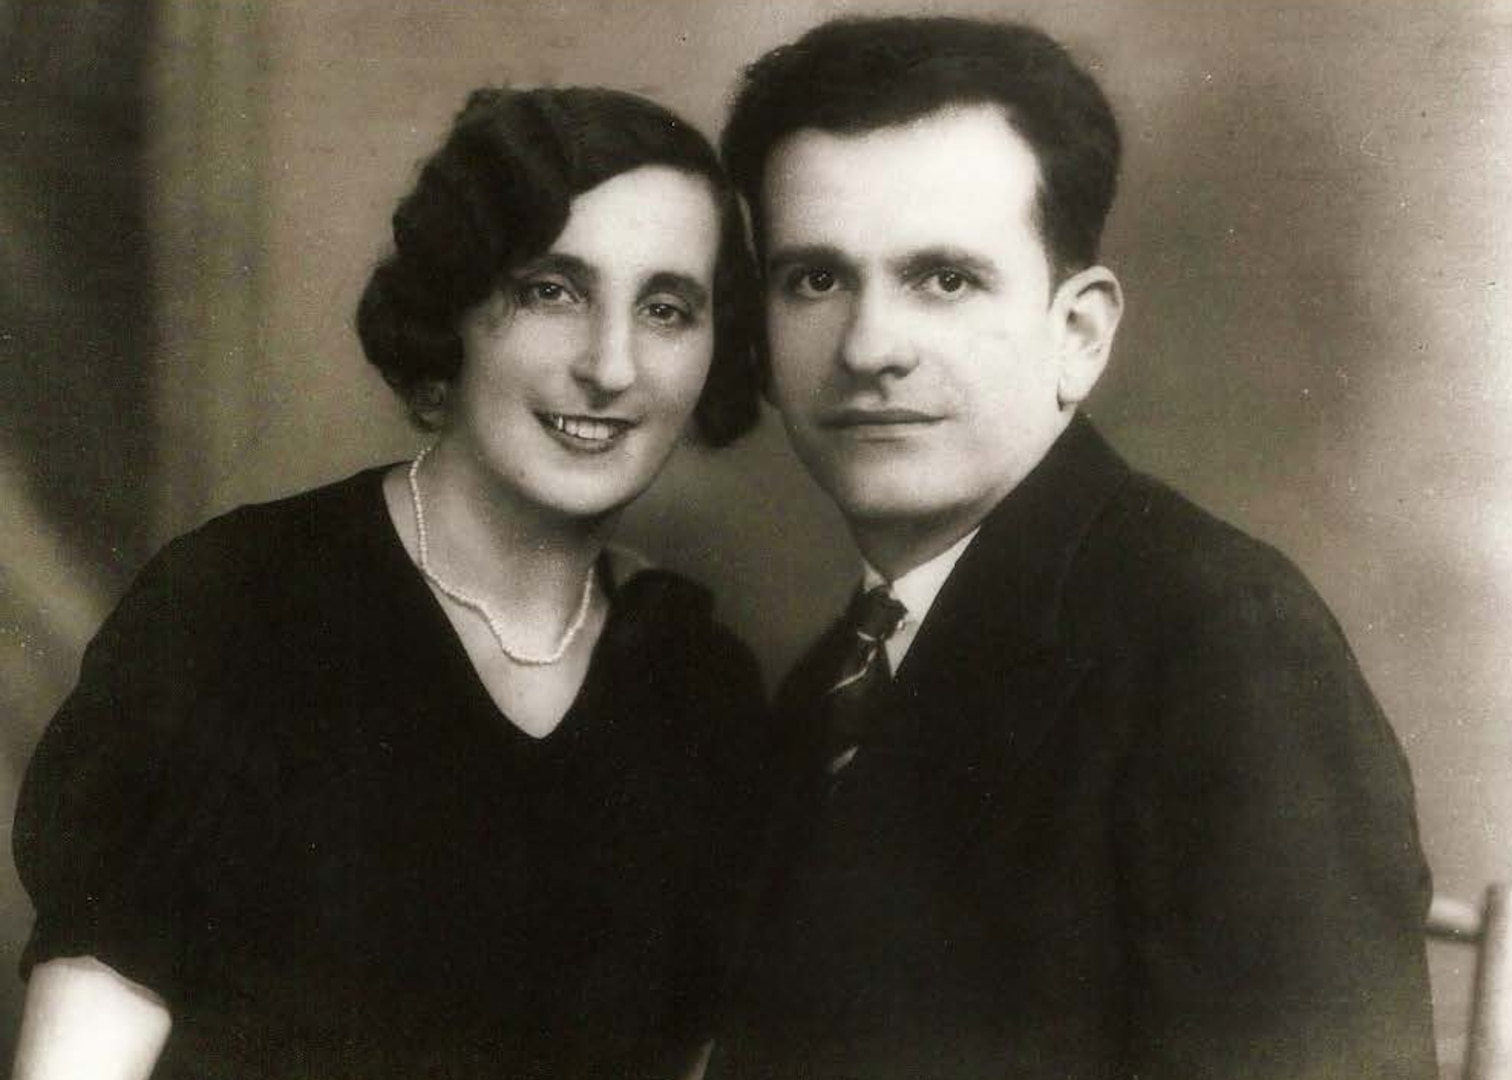 Historical photo of two people in dark clothing smiling at the camera. The woman has dark hair and is wearing a pearl necklace and the man is in a dark suit and also has dark hair.